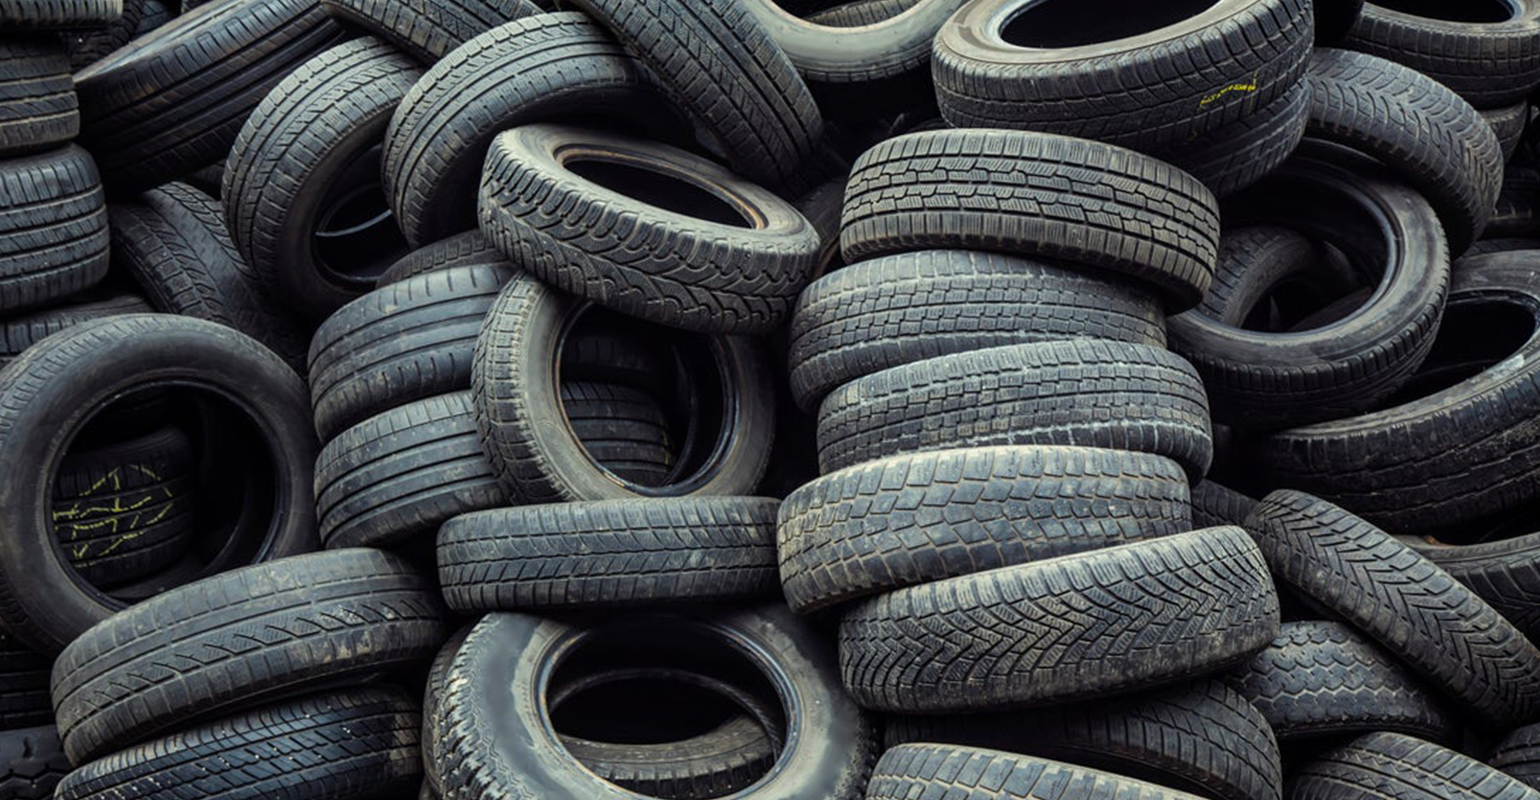 What is the importance of tires carbon black suppliers & how it is used?